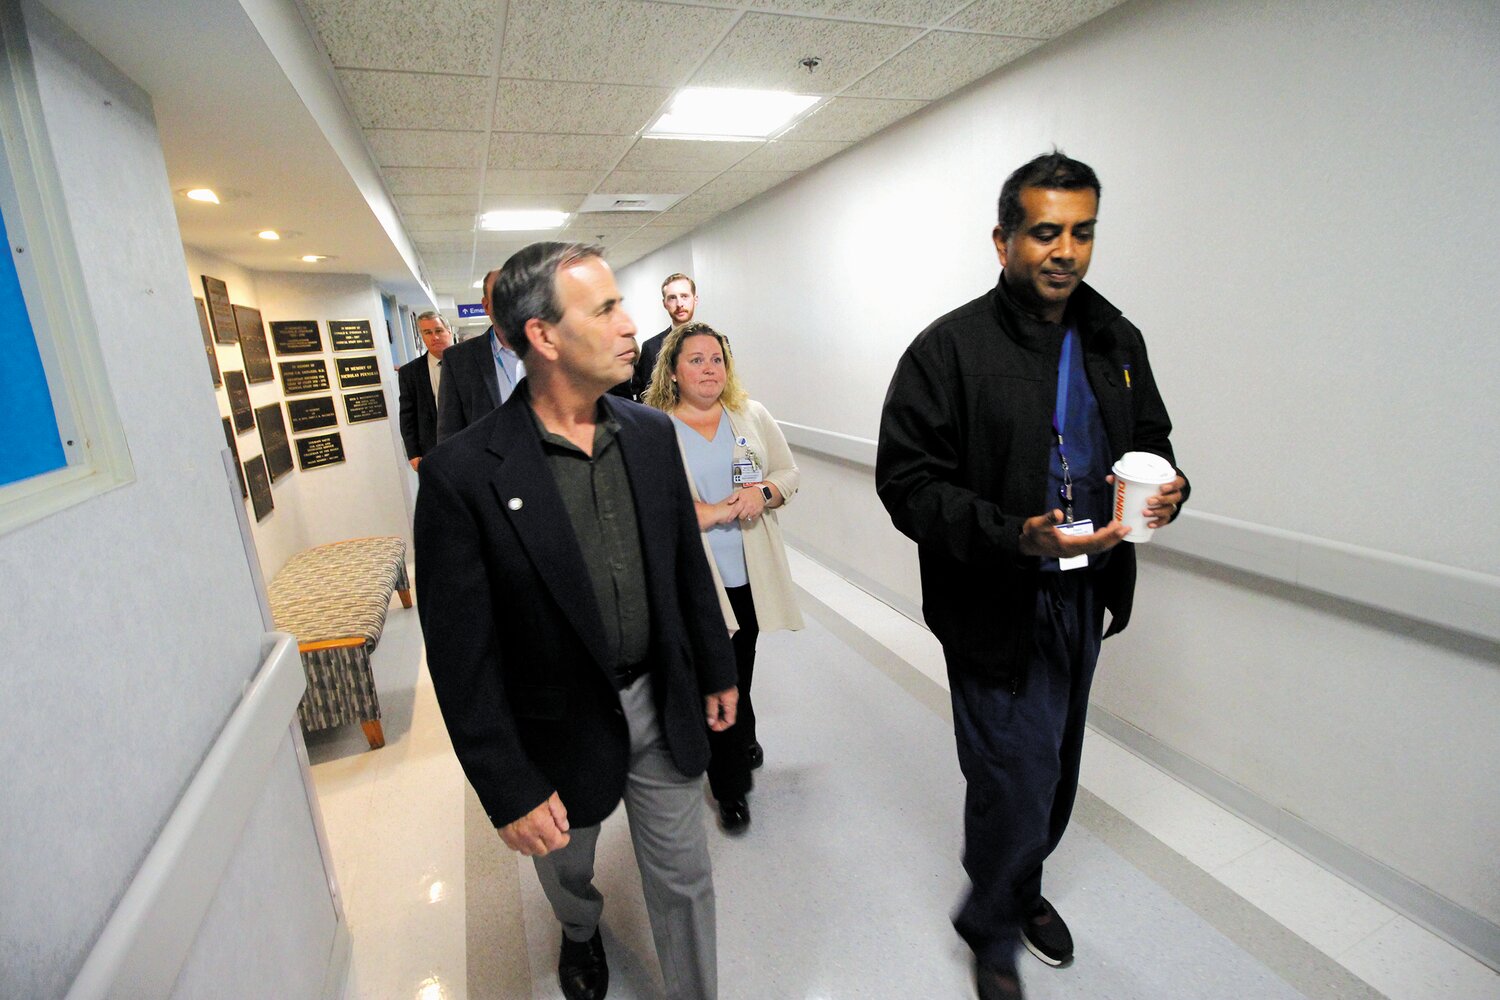 TOUR GUIDE: Paari Gopalakrishnan, MD, MBA, is president and chief operating officer of Kent Hospital led Mayor Frank Picozzi on a tour of the hospital Monday with members of the Kent team. Gopalakrishnan was in his scrubs after having spent several early morning hours in the emergency room – often the busiest time – to get a personal up front view of operations. (Warwick Beacon photo)